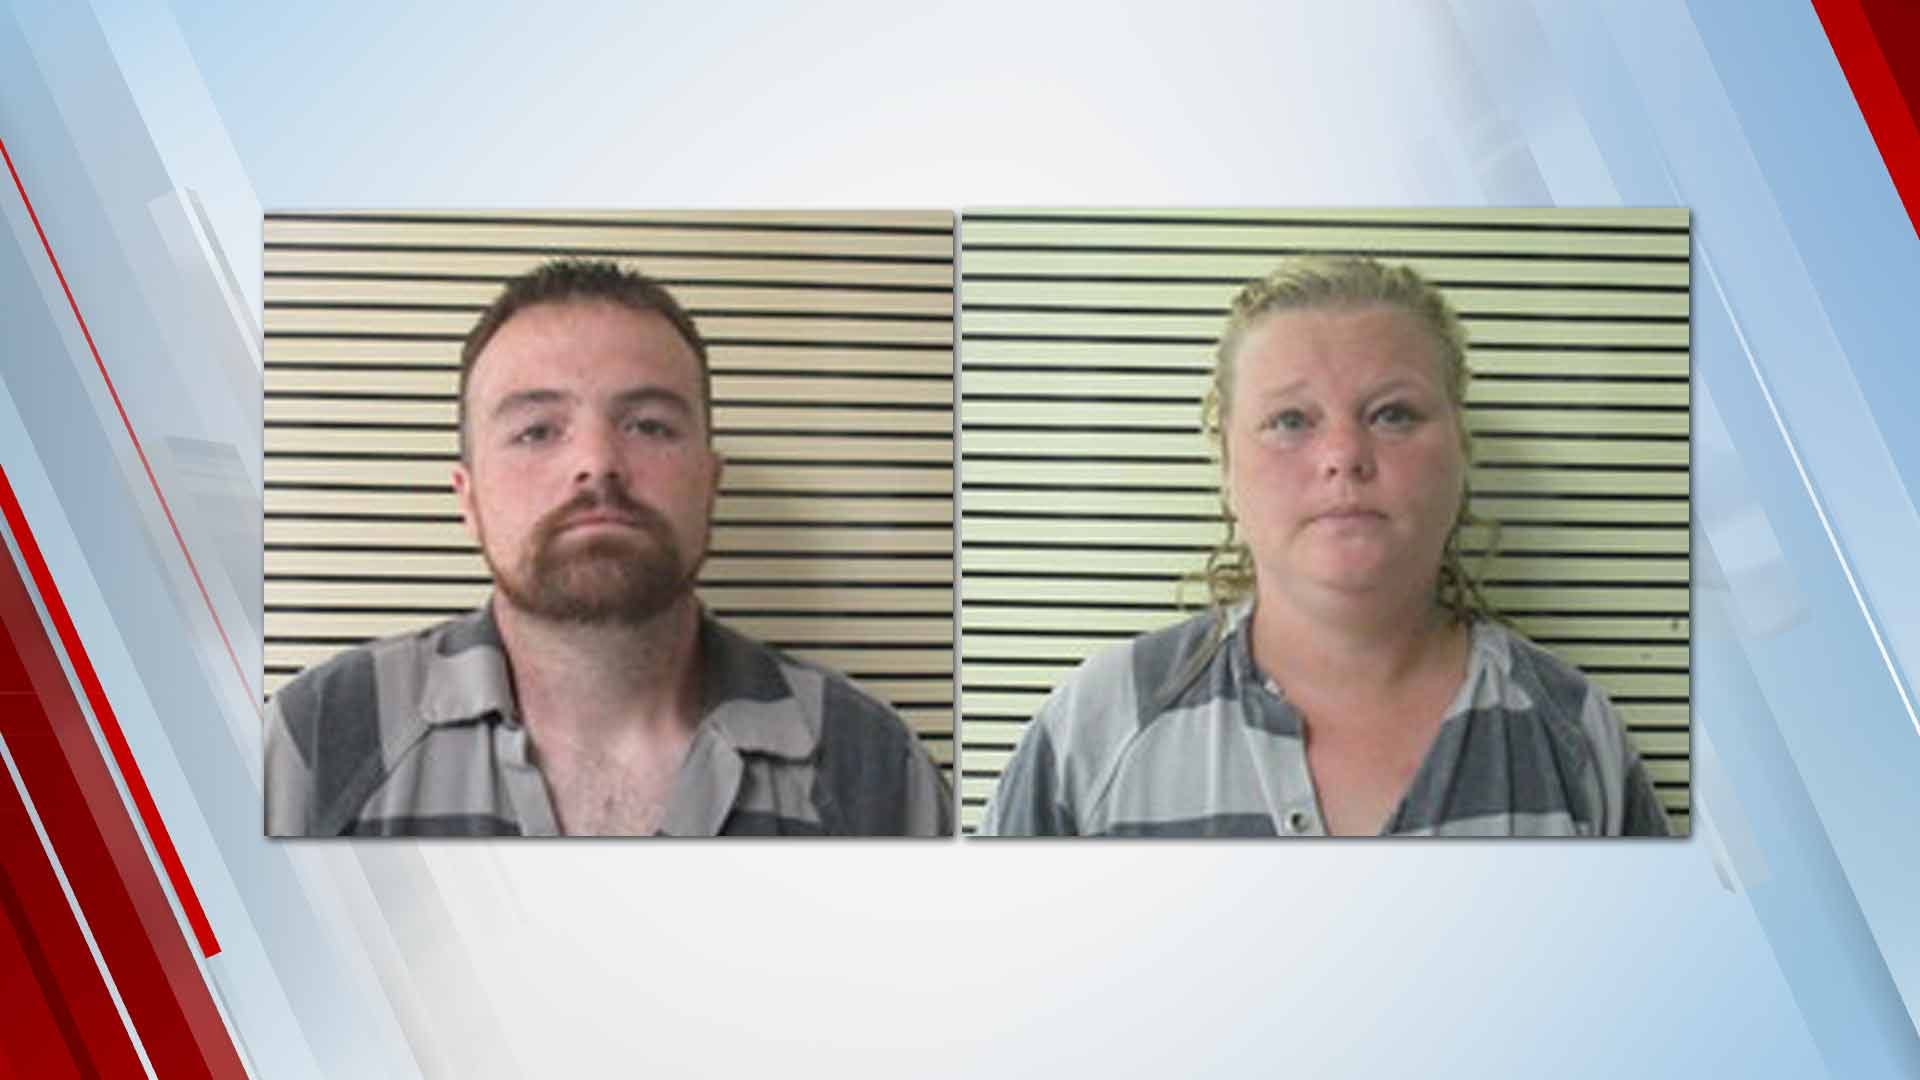 Wagoner Parents Charged With Murder In Drowning Death Of Their 4-Year-Old Son